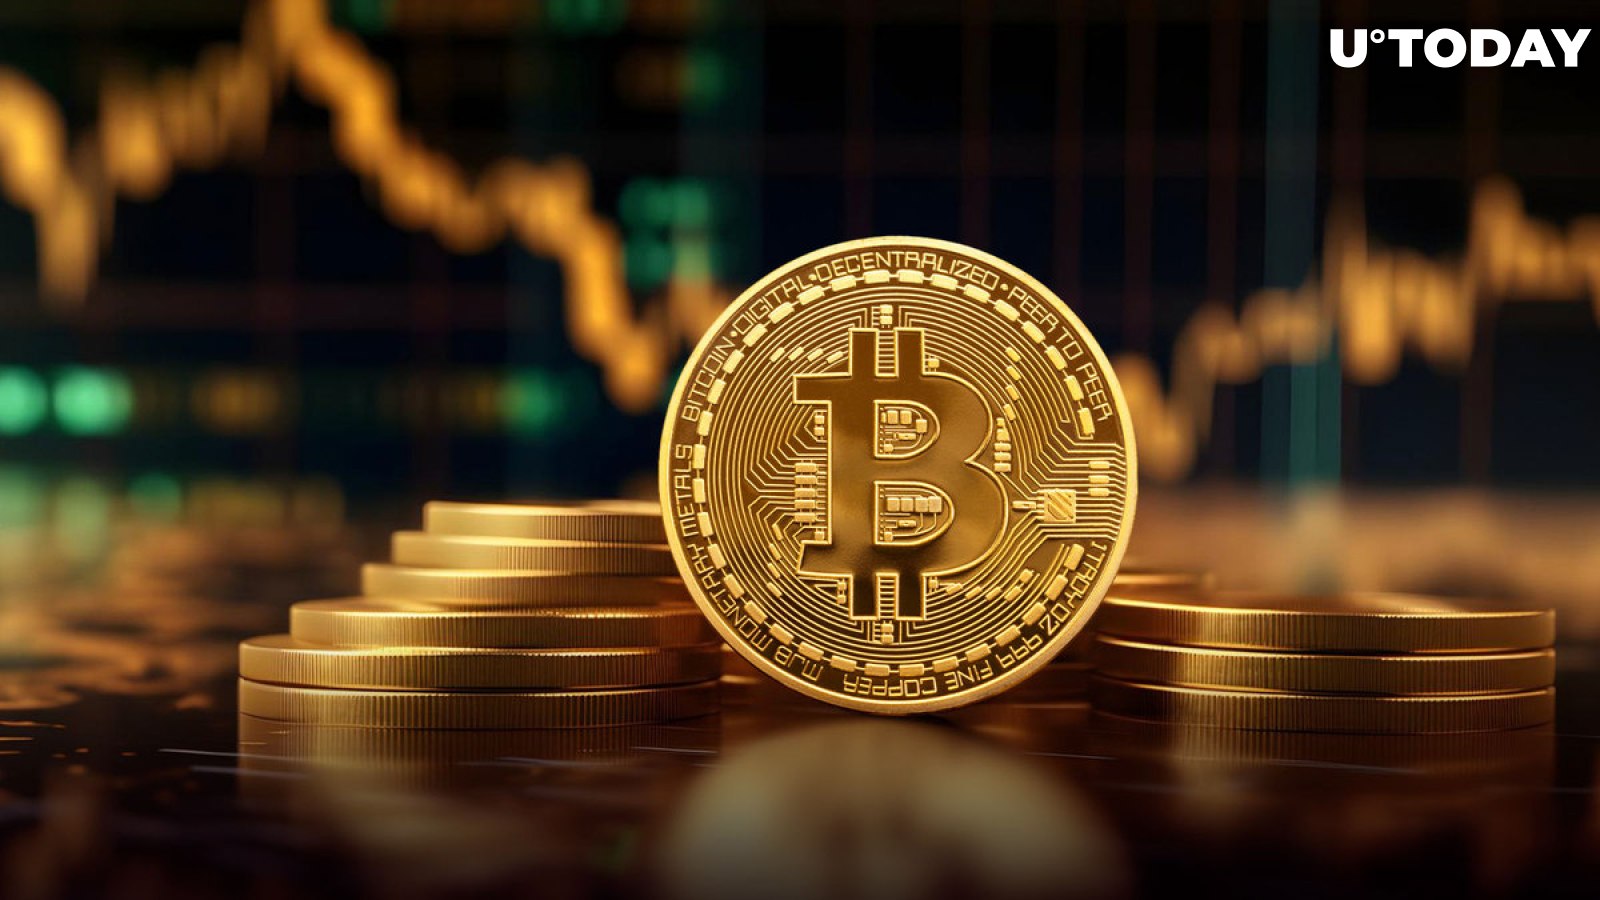 Bitcoin (BTC) Might Be Due for Parabolic Growth, Analyst Says